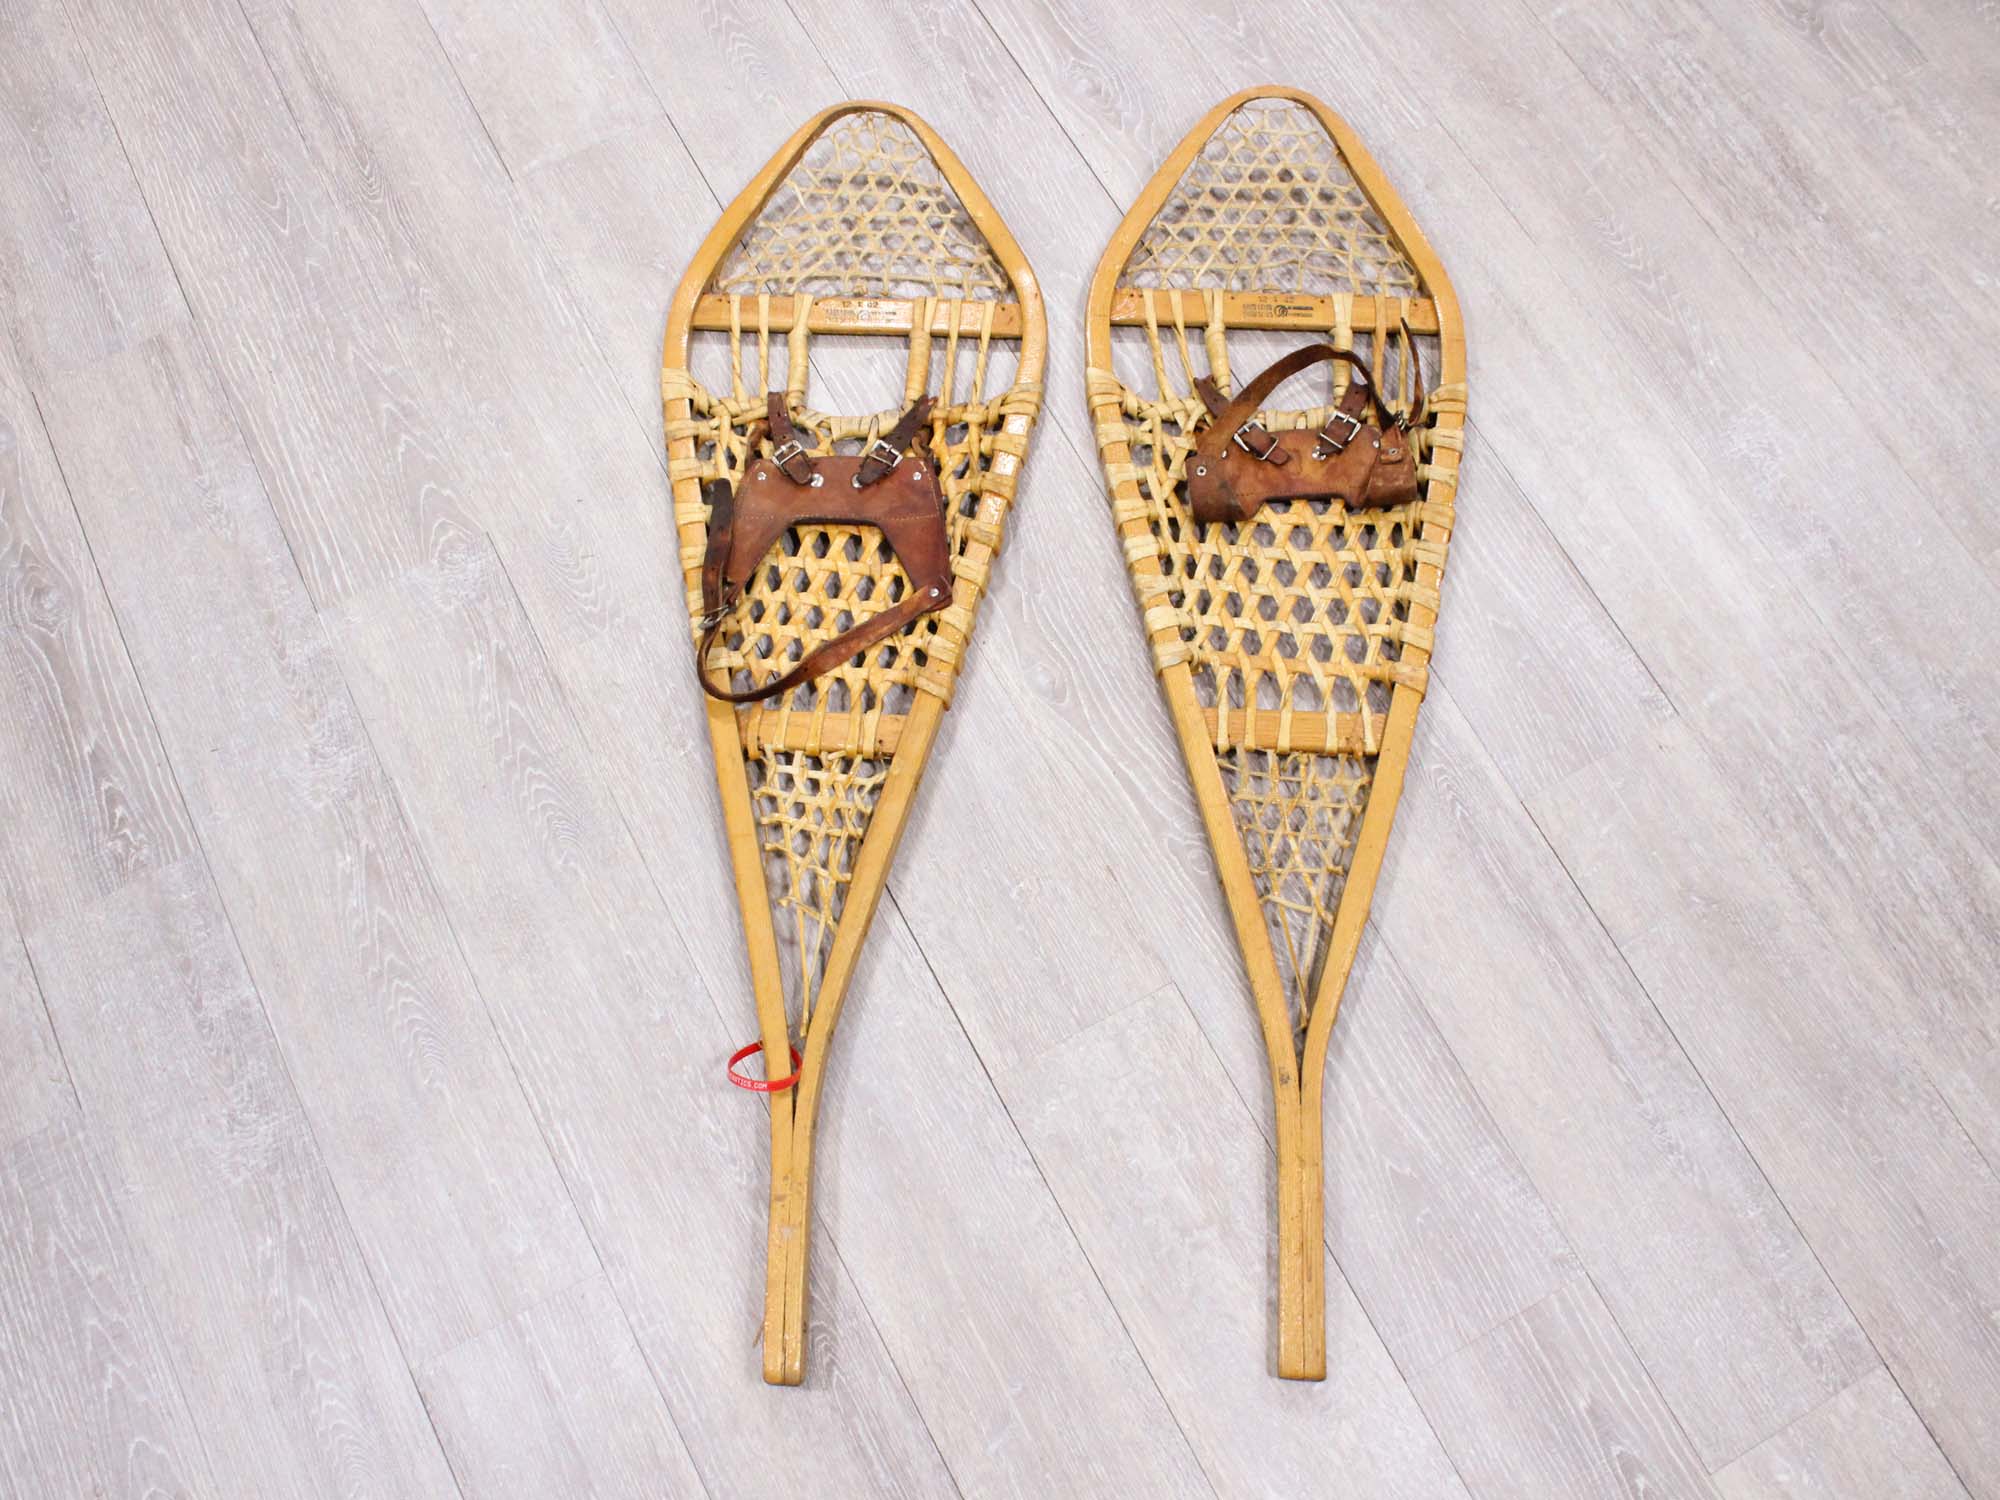 Used Snowshoes: Good Quality with Harness: Gallery Item 